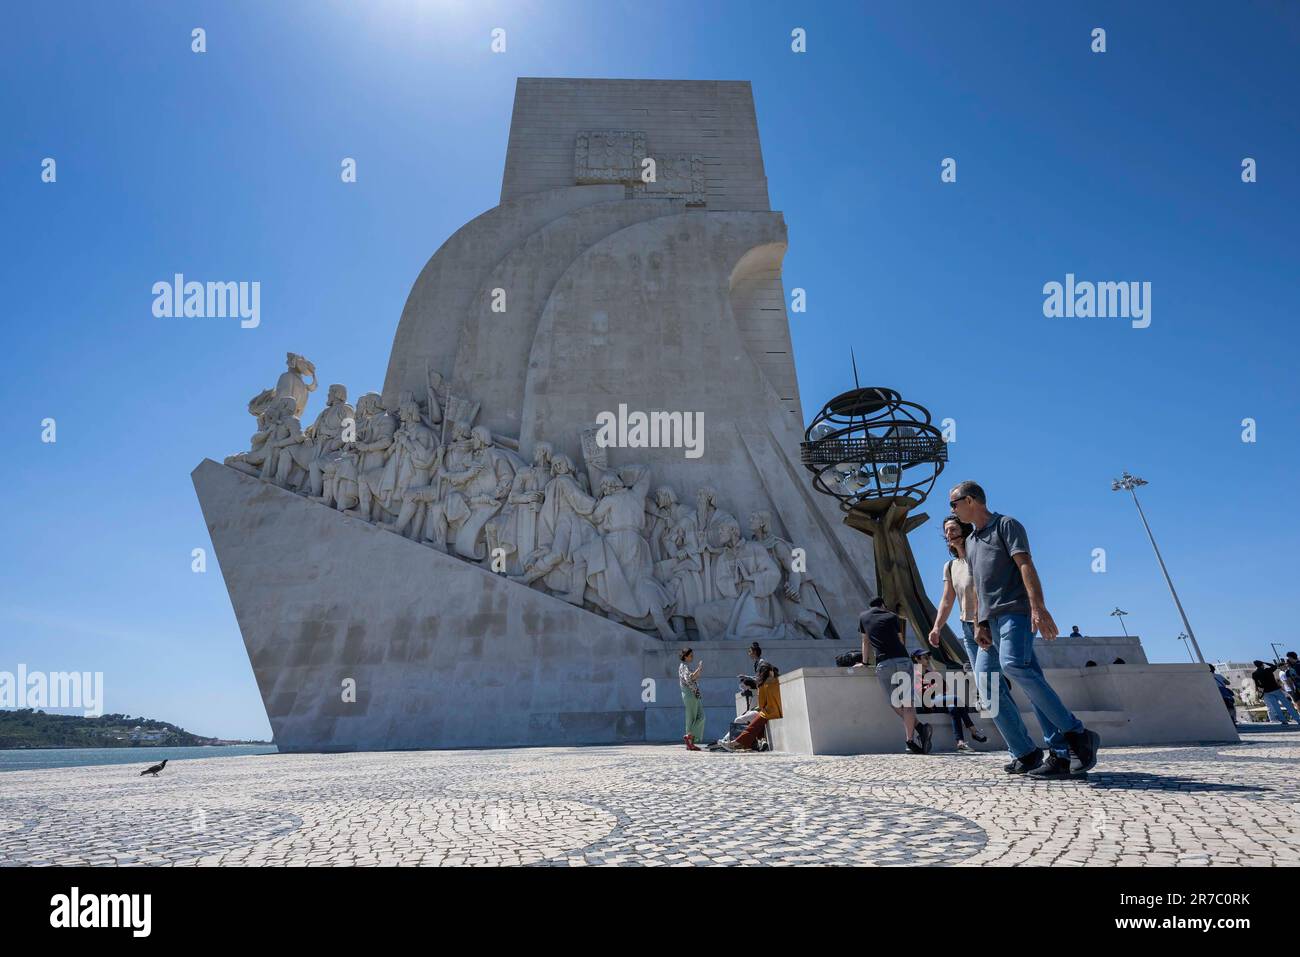 People are seen walking near the Monument to the Discoveries in the vicinity of the Rio Tejo promenade. The monument is a gigantic structure built in 1960 on the banks of the Tejo River in Belém, Lisbon, to commemorate the 500th anniversary of the death of Henry the Navigator and also to honor the memory of all those who were involved in the progress of the Age of Discoveries. Author of the work were the architect José Ângelo Cottinelli Telmo and the sculptor Leopoldo de Almeida, who were responsible for the sculptures. (Photo by Jorge Castellanos/SOPA Images/Sipa USA) Stock Photo